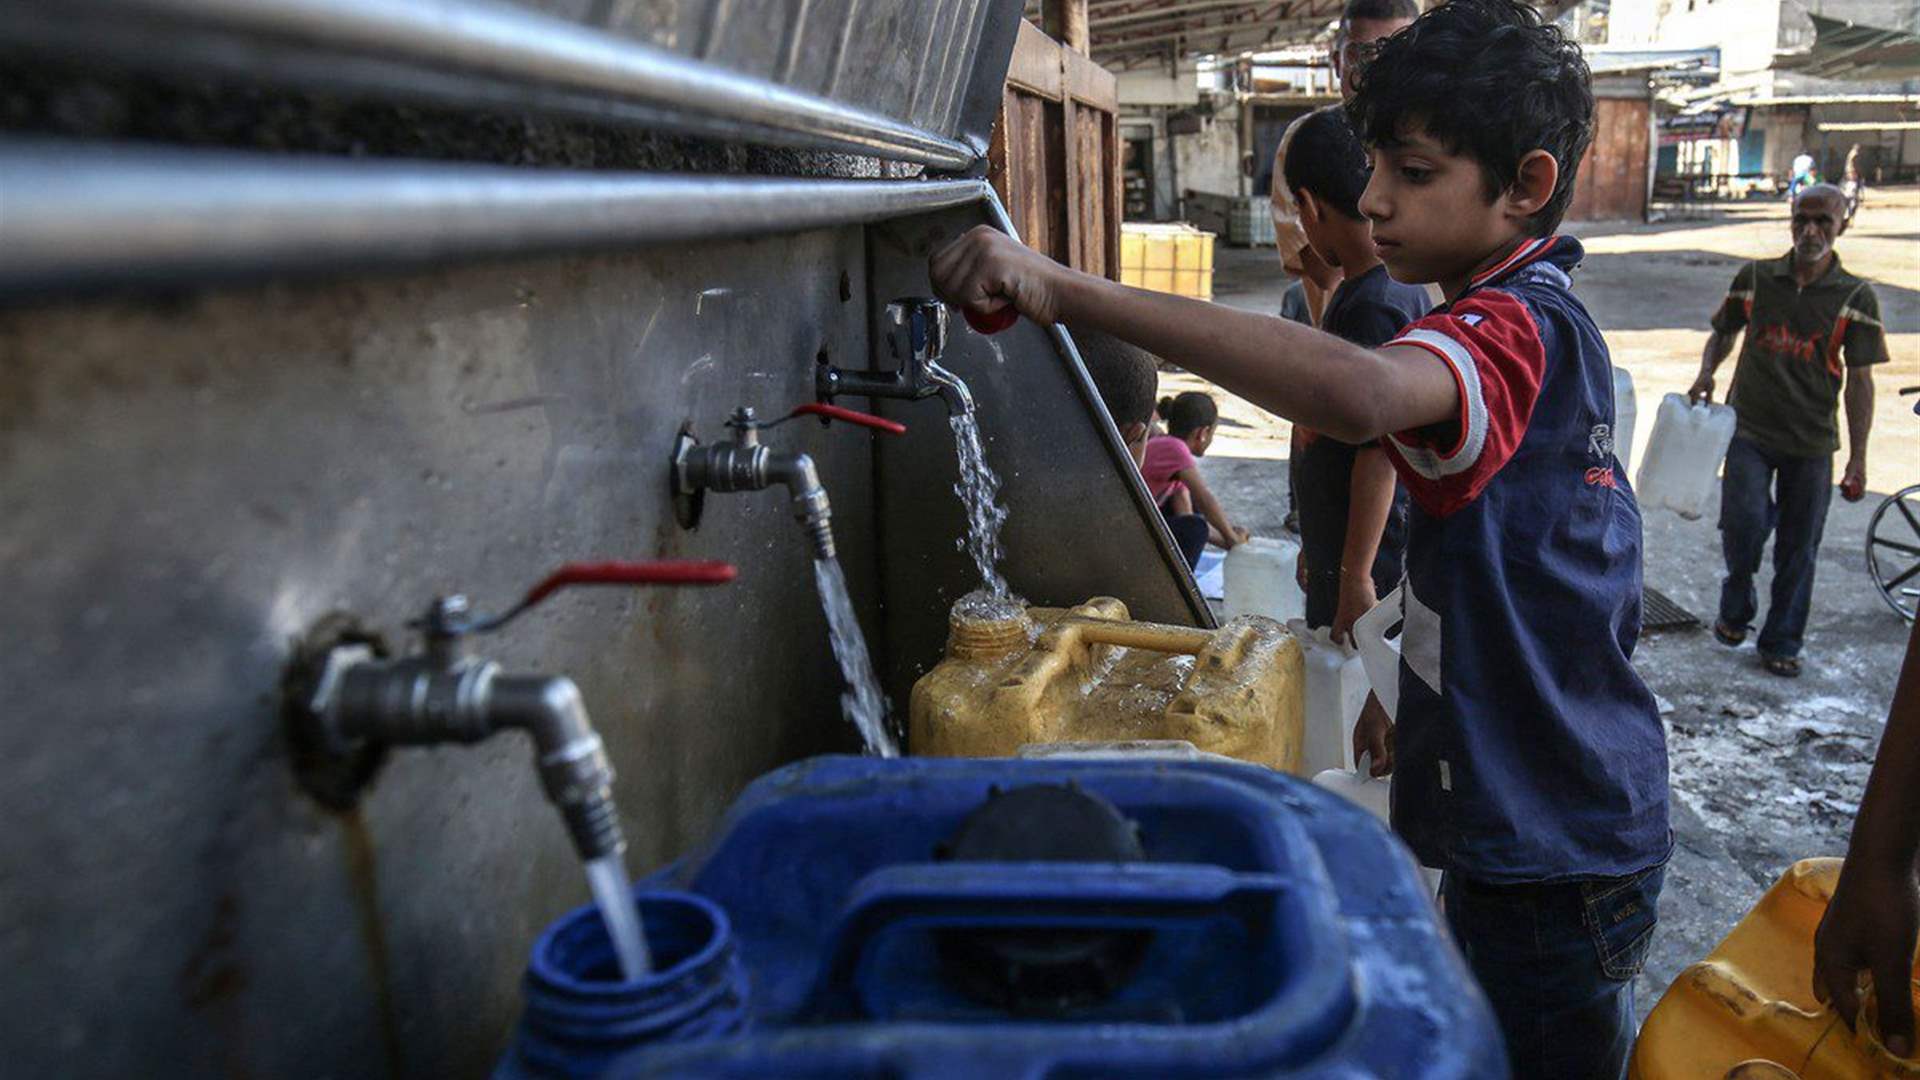 A lifeline in Gaza&#39;s water emergency: Accessing desalinated water